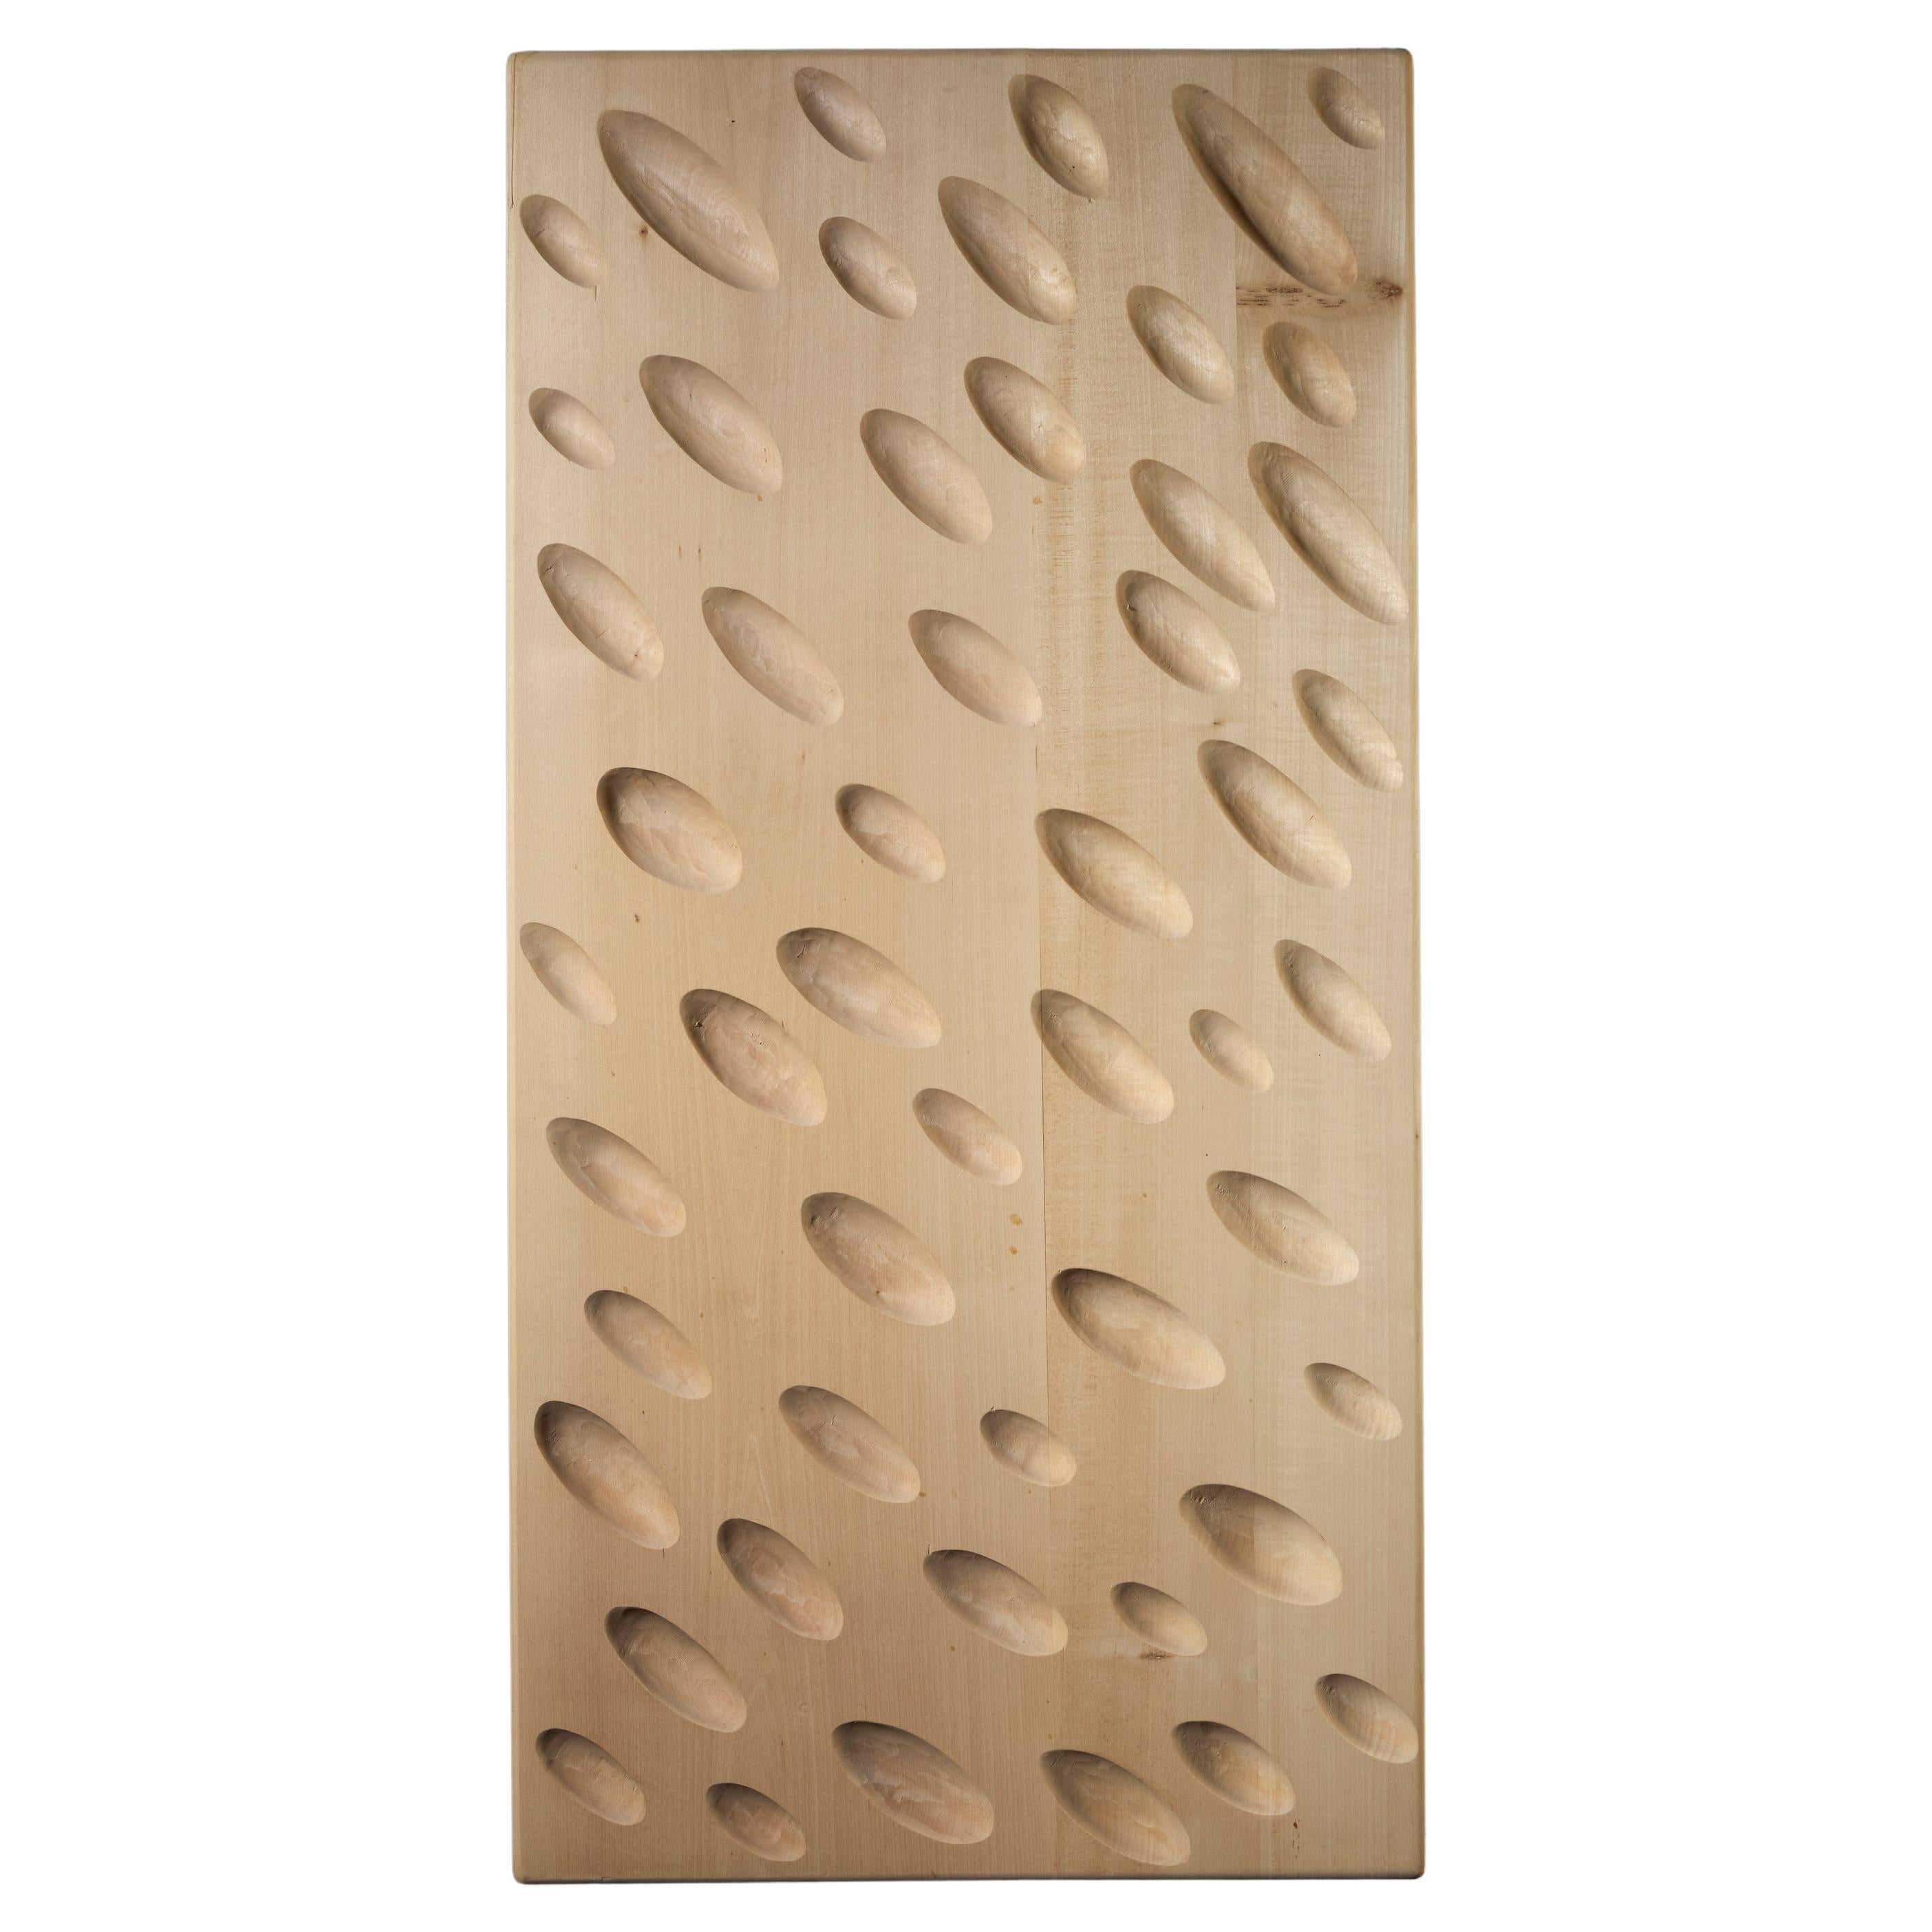 Carved panel with elongated ellipses, 2011